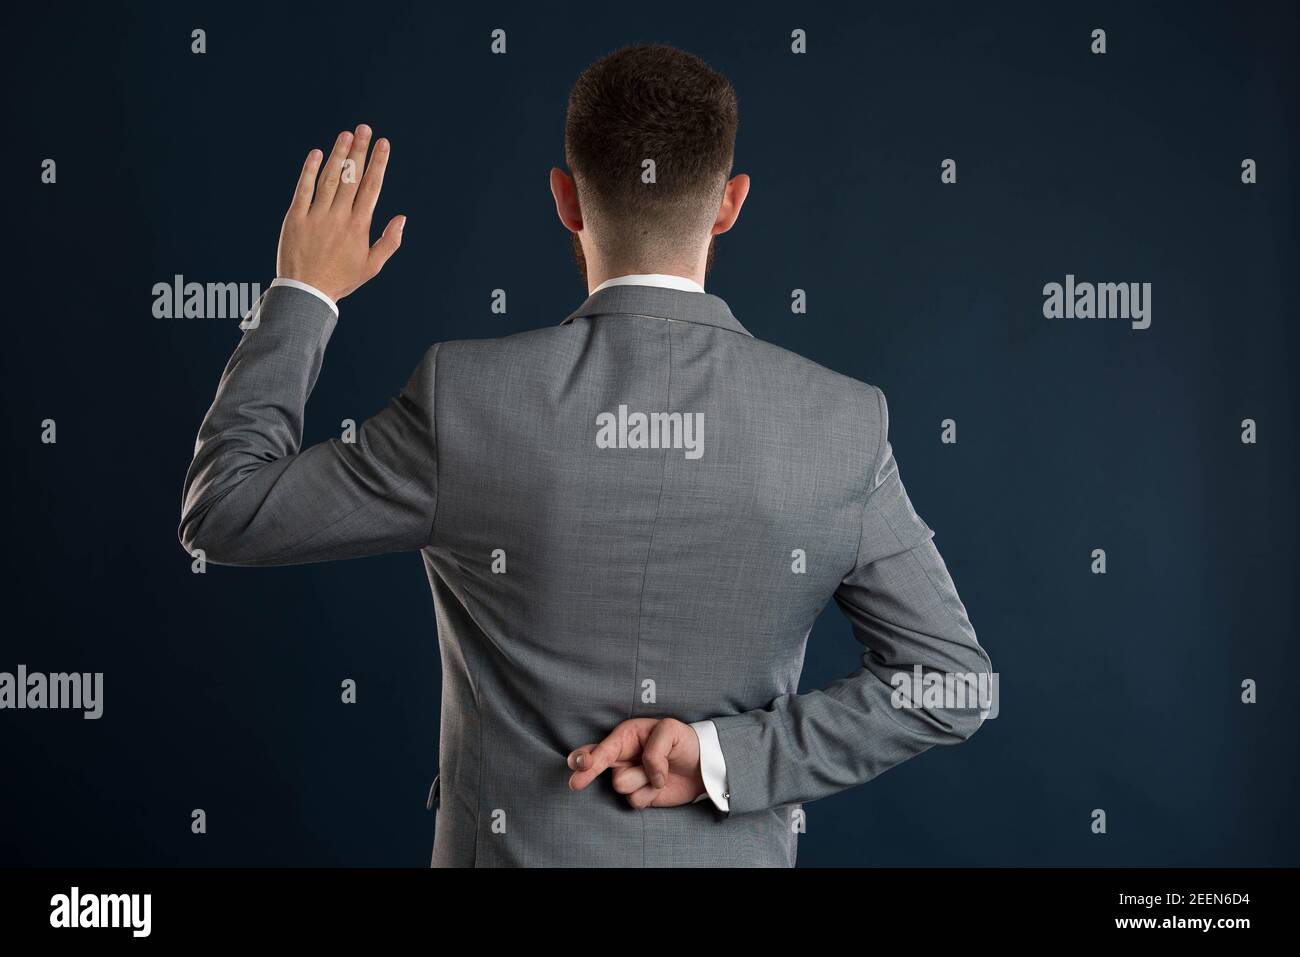 Young businessman taking a fake oath with his back to the camera wearing a grey jacket Stock Photo